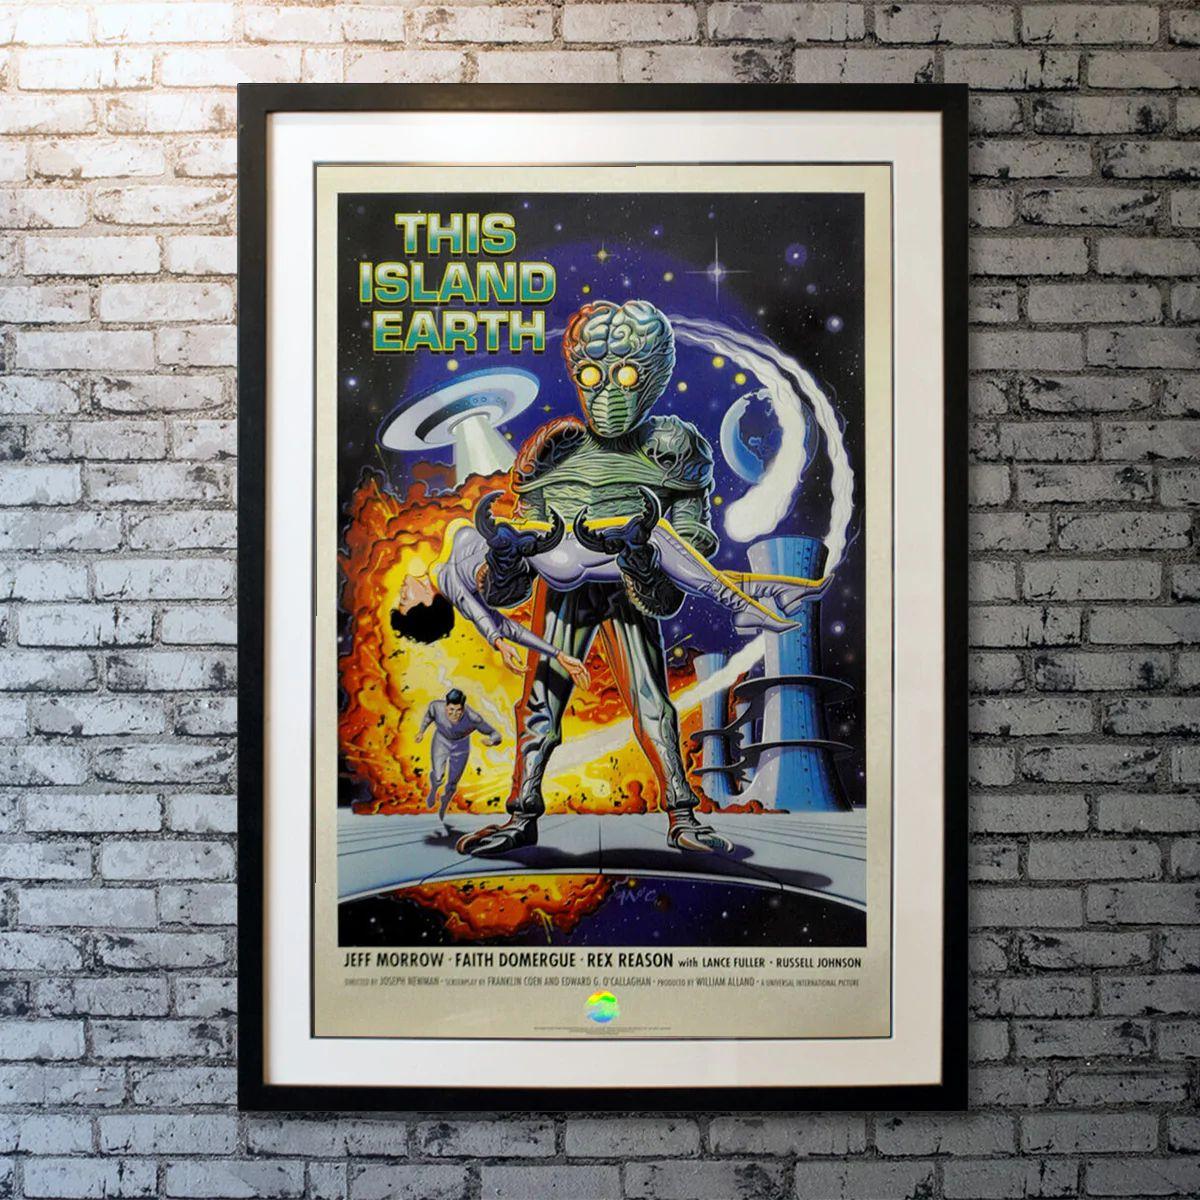 This Island Earth, Unframed Poster, 1990R

Original US One Sheet (27 X 40 Inches). Aliens come to Earth seeking scientists to help them in their war.

Year: 1990 Re-release
Nationality: Original US One Sheet
Condition: Unfolded
Size: 27 X 40